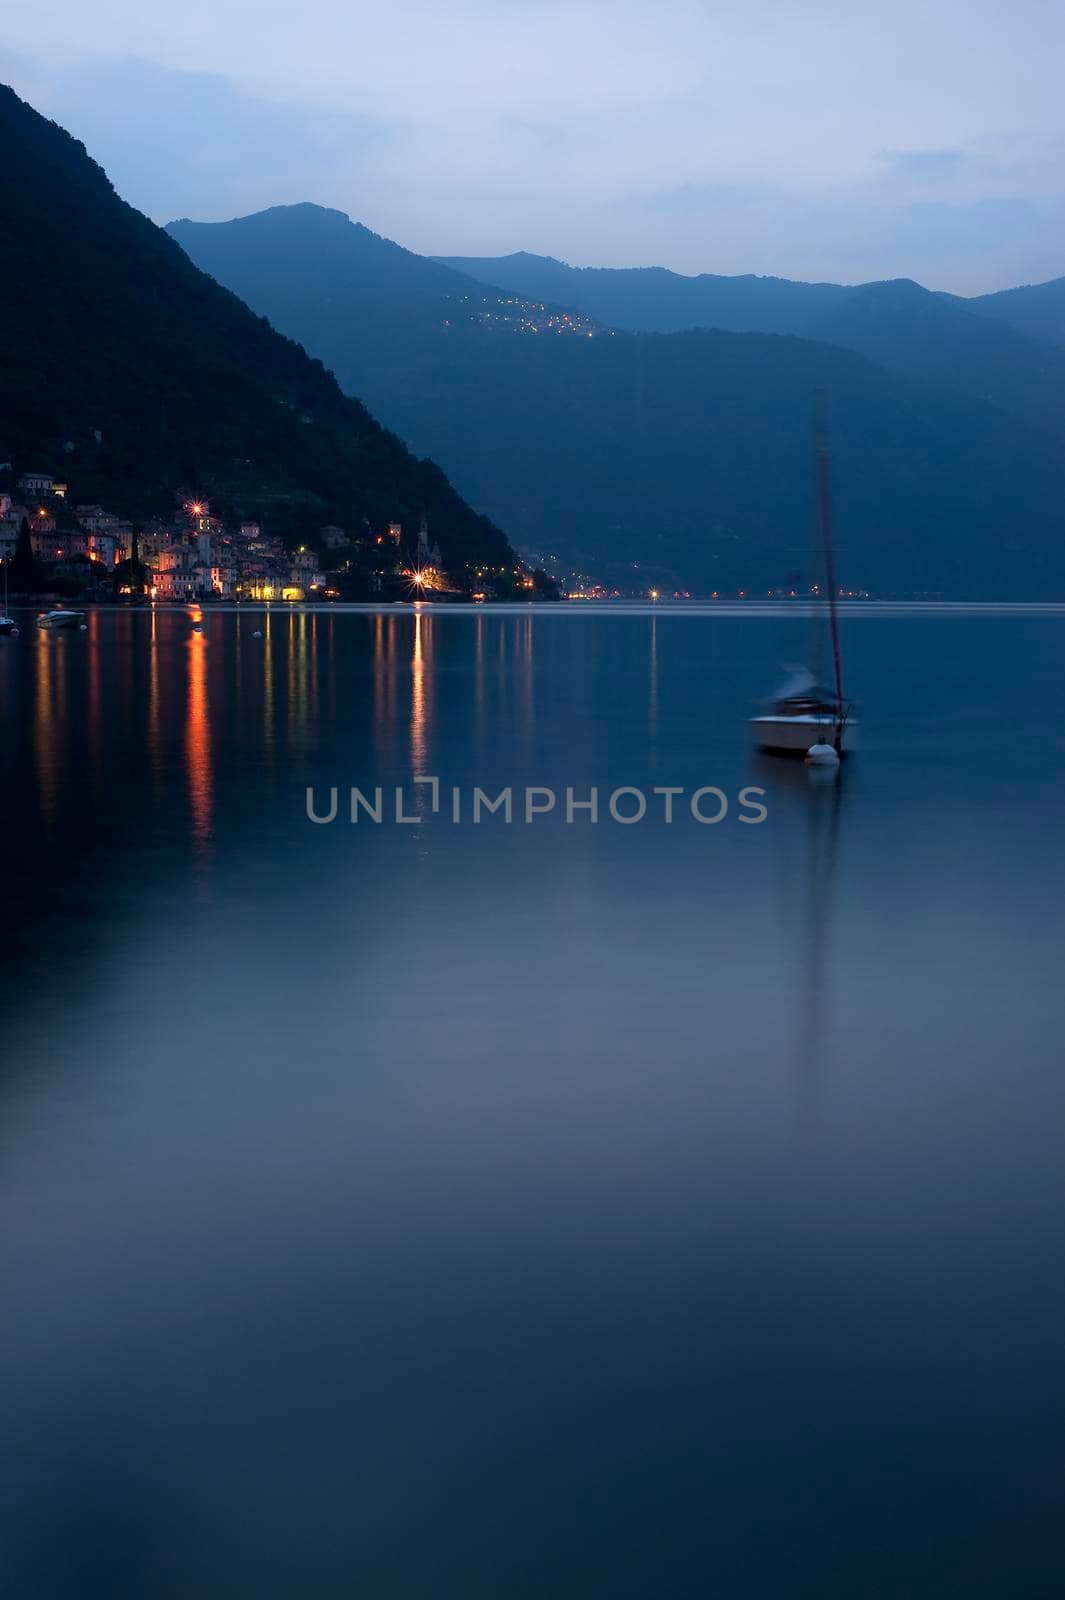 Sunset on Lake Como. Point of view: Brienno.